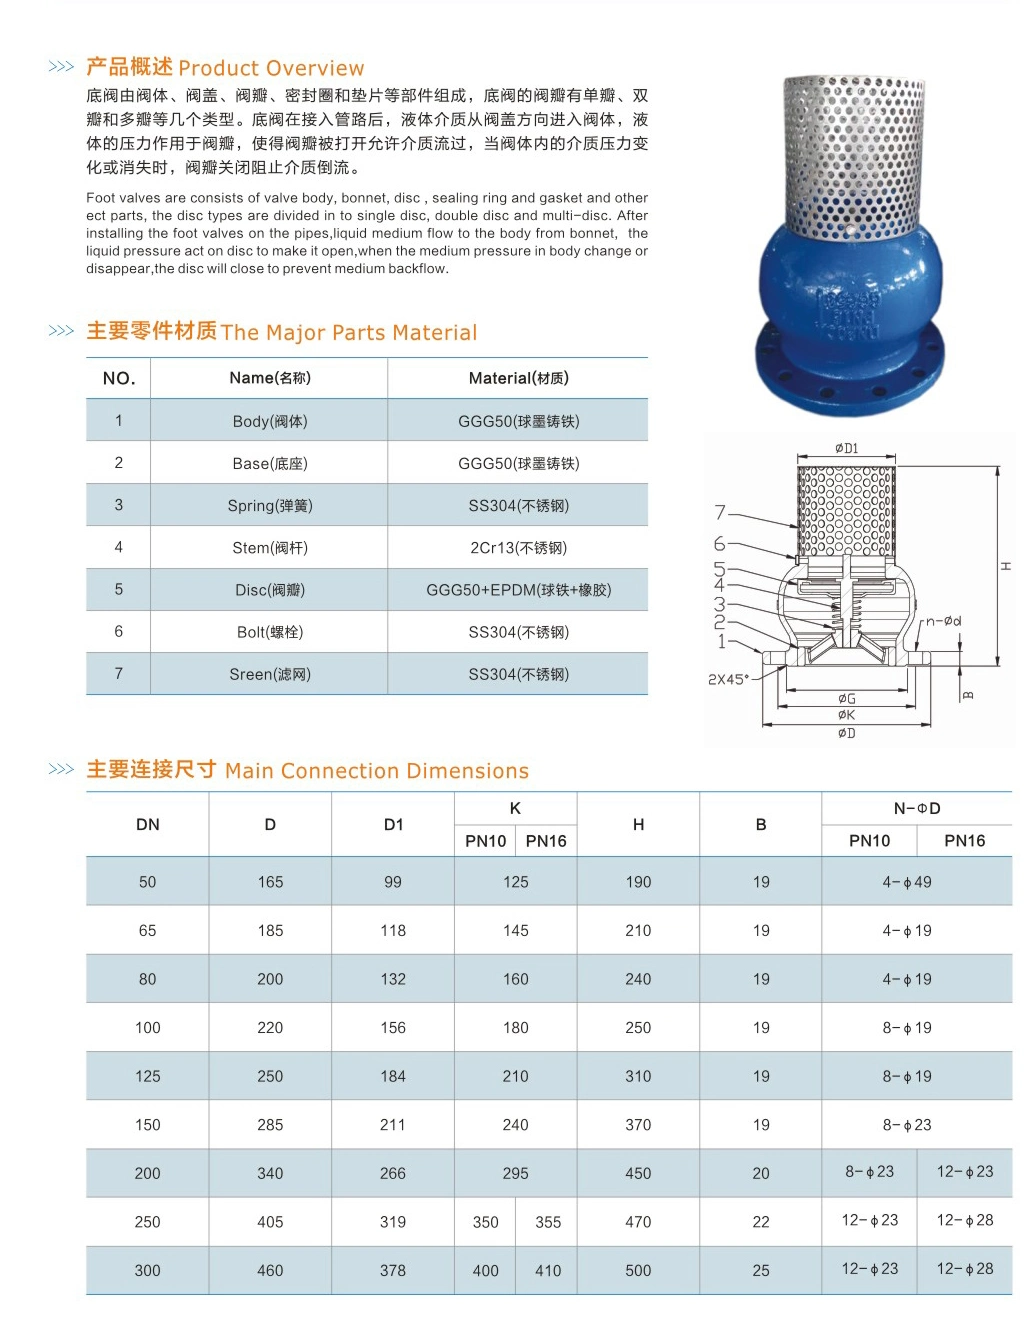 Ductile Iron SS304 Flanged End ANSI Foot Valve PVC Check Valve Gate Valve Globe Valve Lift Foot Valve